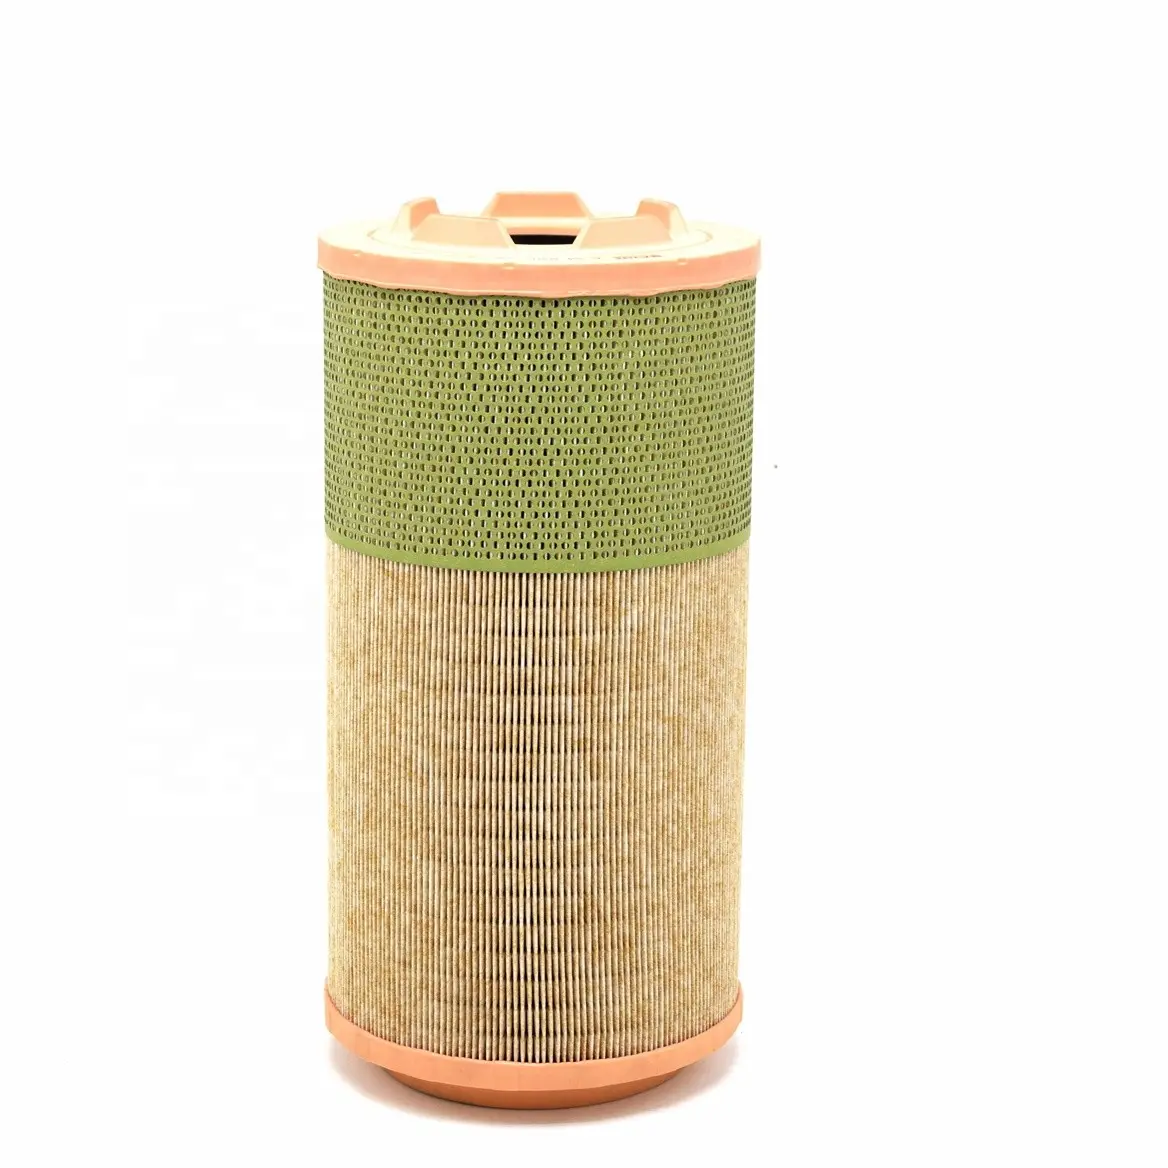 Vervanging Voor Volvo Filters 21010256 21377913 Luchtfilterelement Primaire C24820 Fa3549 Sl81444 S7a09a 01182953 1182953 A-71340